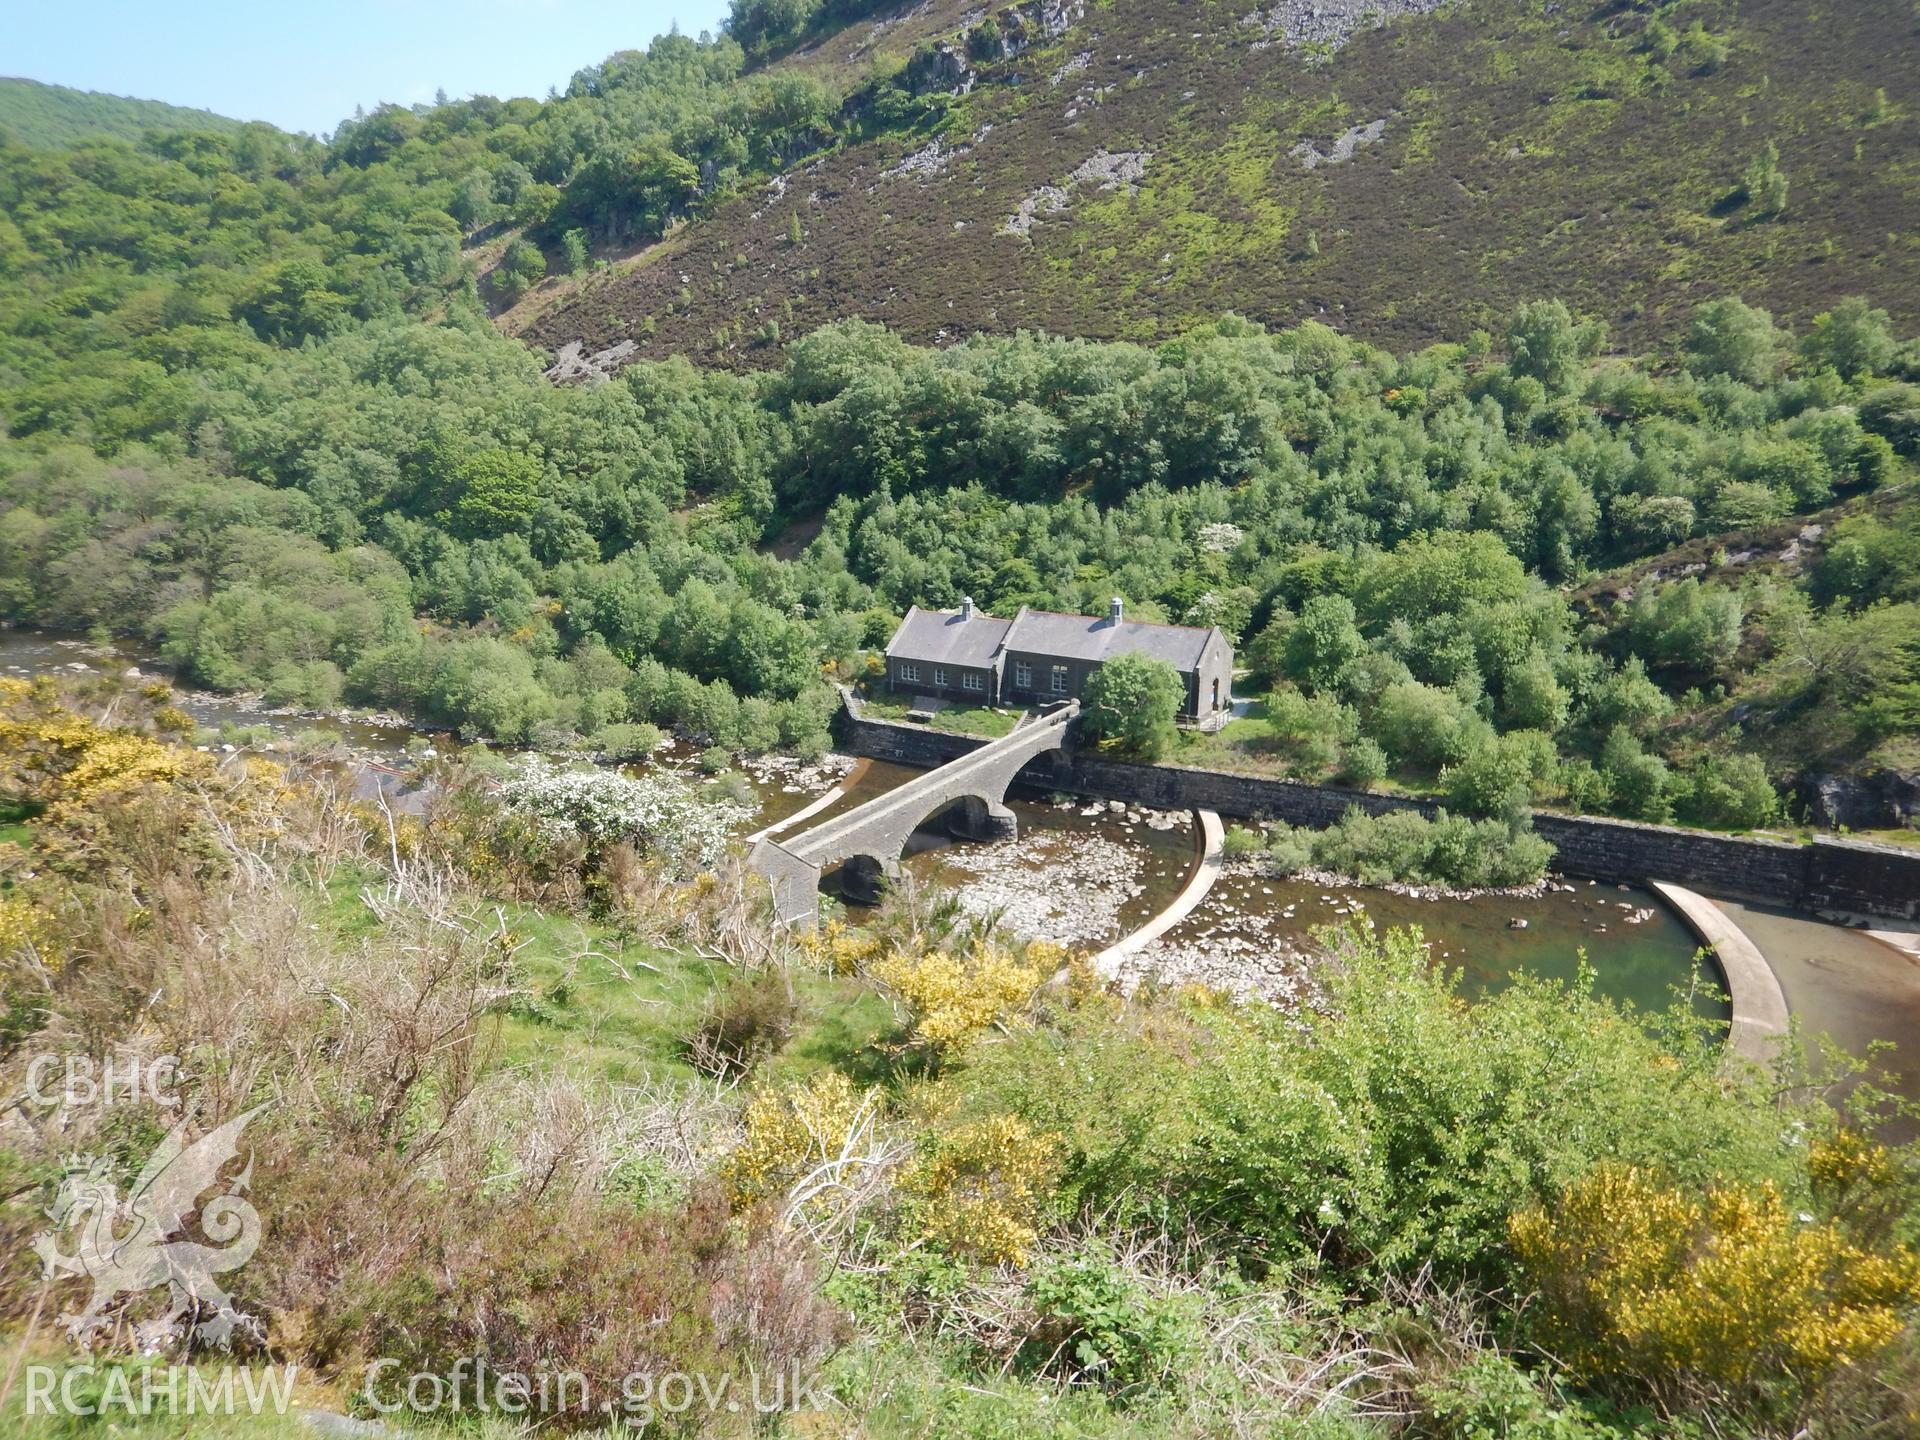 Caban Coch hydro electric station, below the Caban Coch dam, looking south-east. Photographed for Archaeological Desk Based Assessment of Afon Claerwen, Elan Valley, Rhayader. Assessment by Archaeology Wales in 2018. Report no. 1681. Project no. 2573.